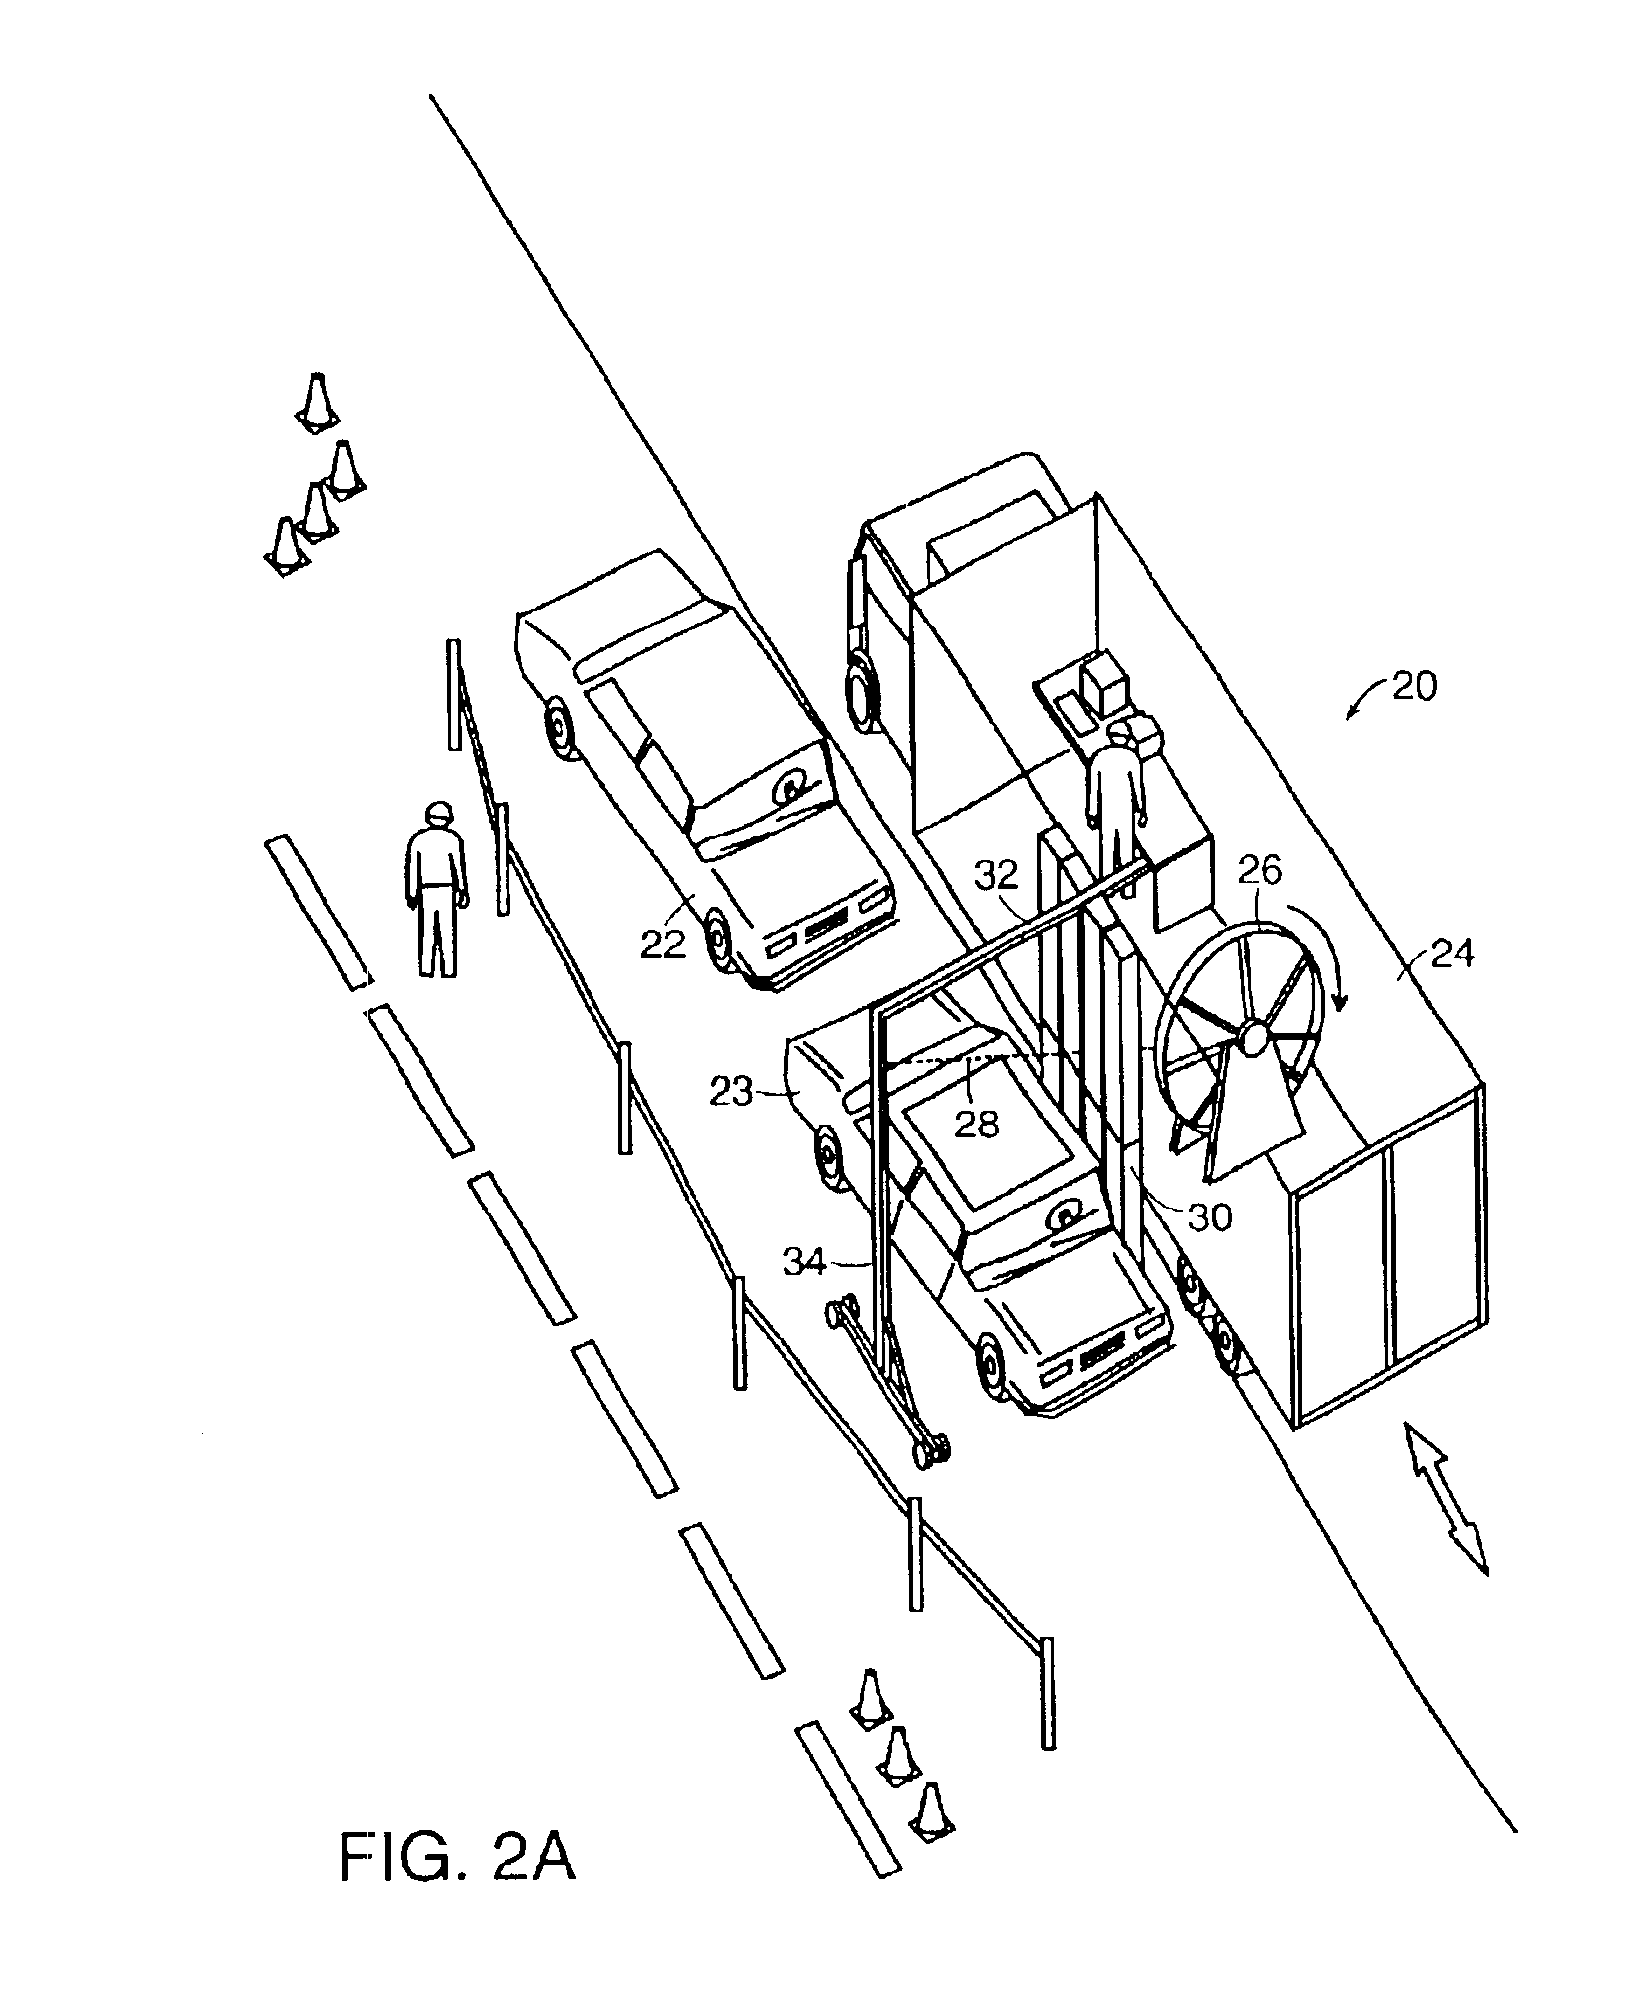 Mobile x-ray inspection system for large objects